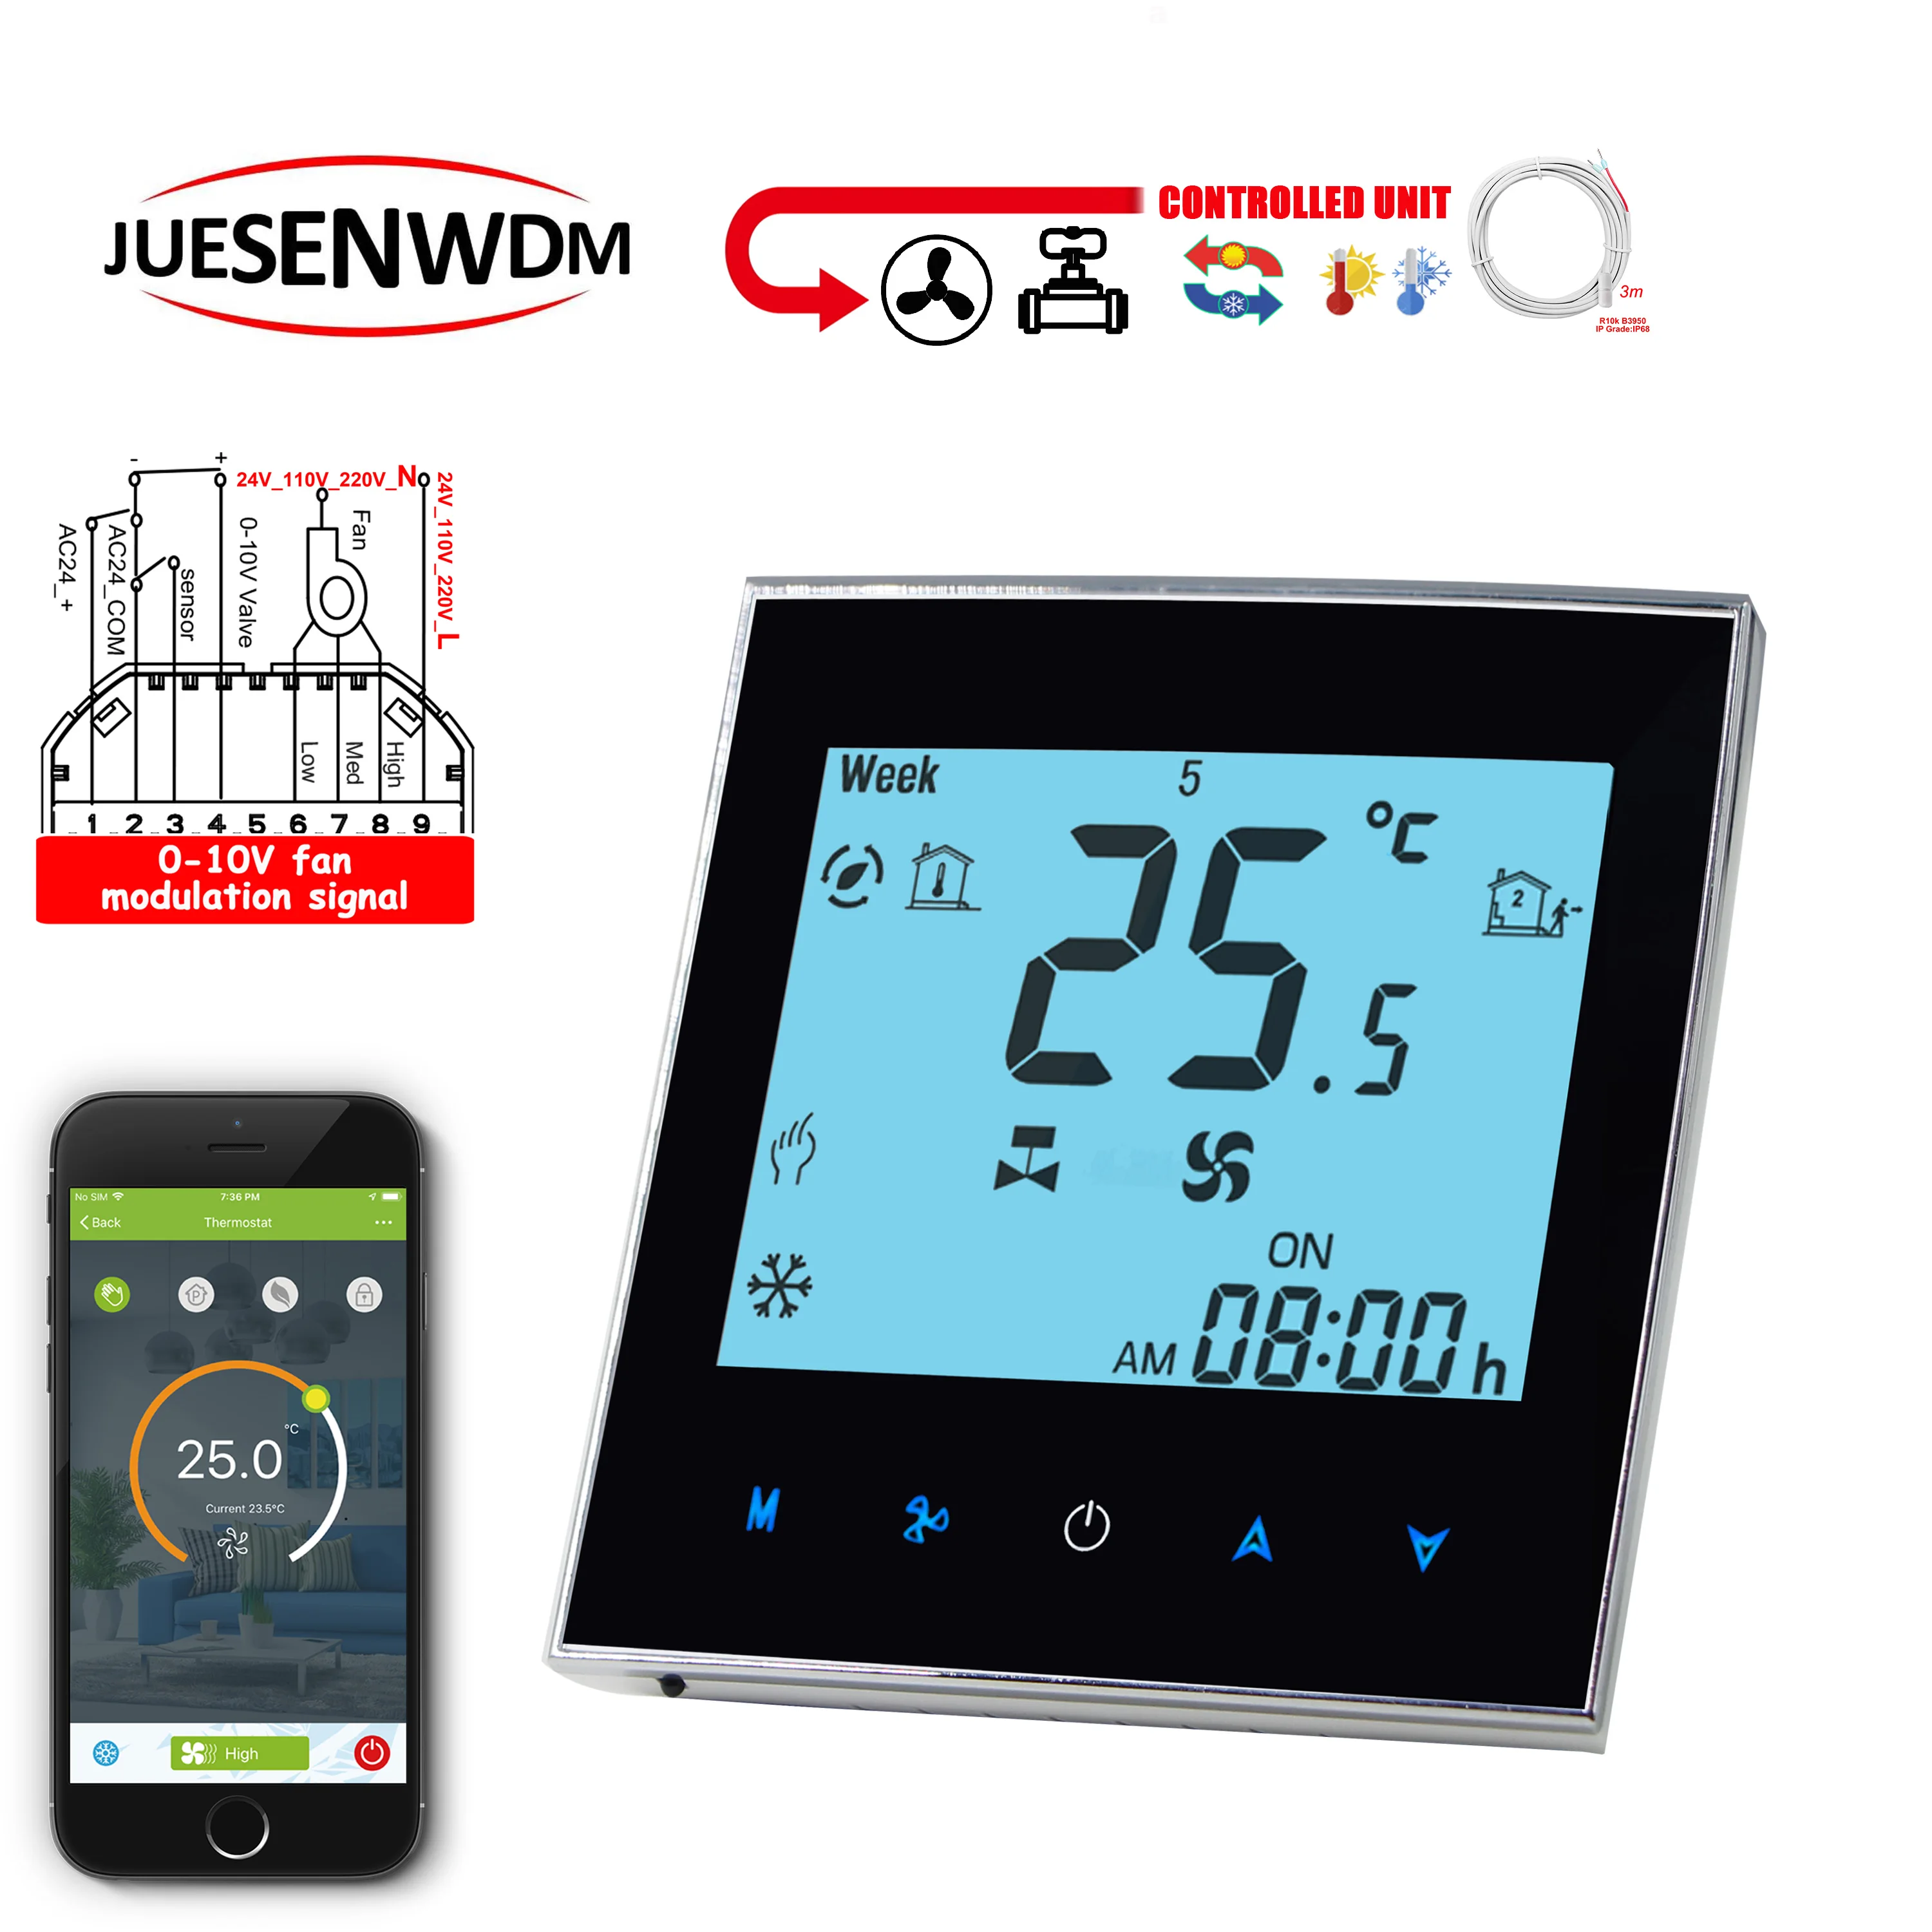 

EU Cooling Heating WIFI&RS485 THERMOSTAT With Adjust Valve 0-10V COM 24V Dry Contact 3-Speed Free Connection 12 24 36 110 220V